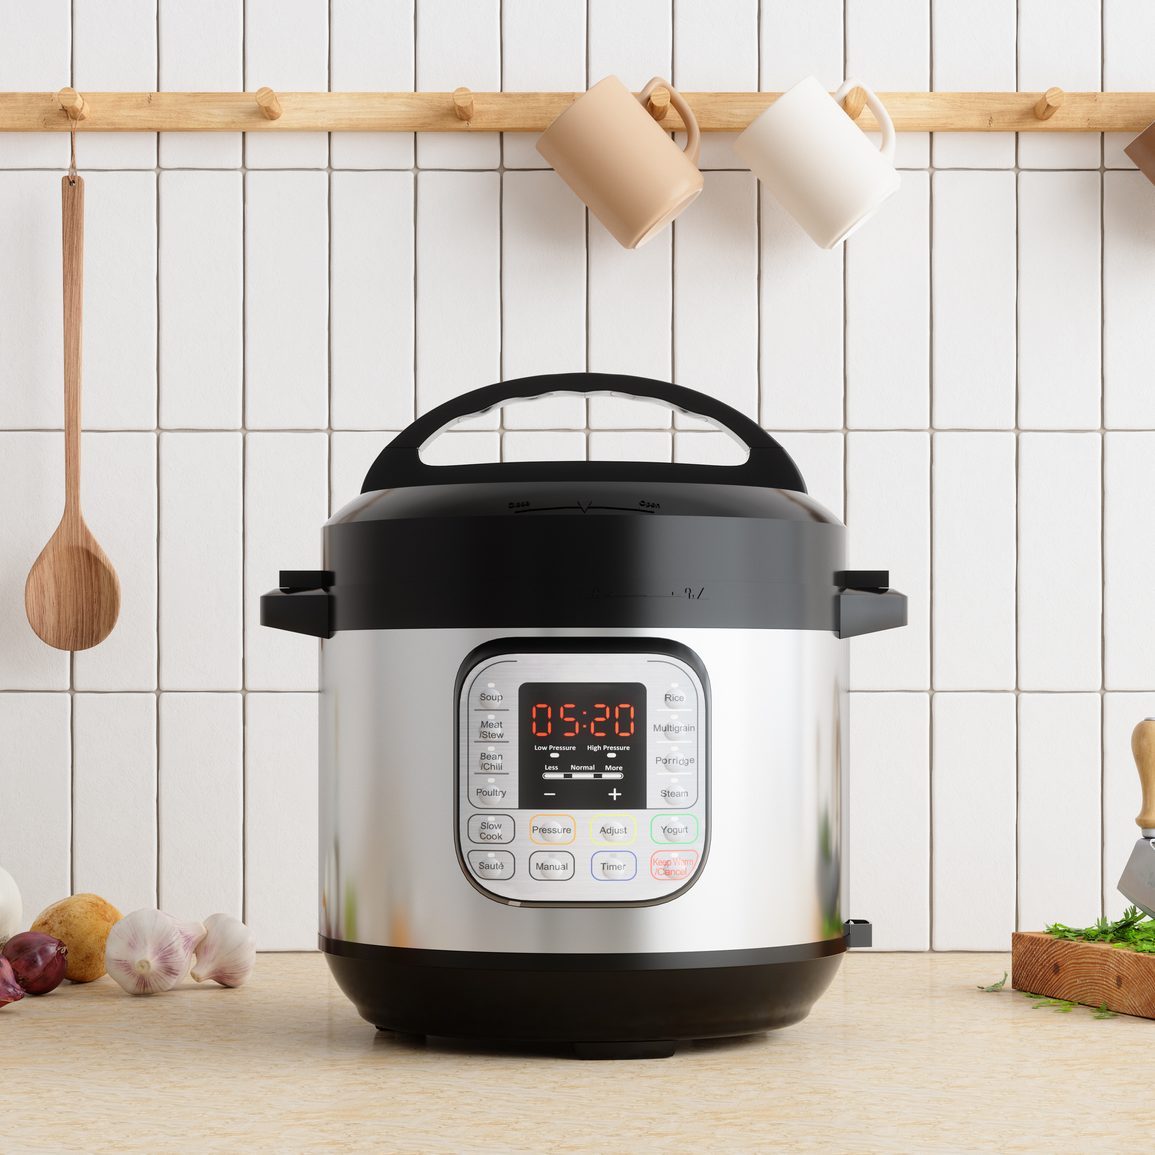 6 Easy Electric Pressure Cooker Recipes